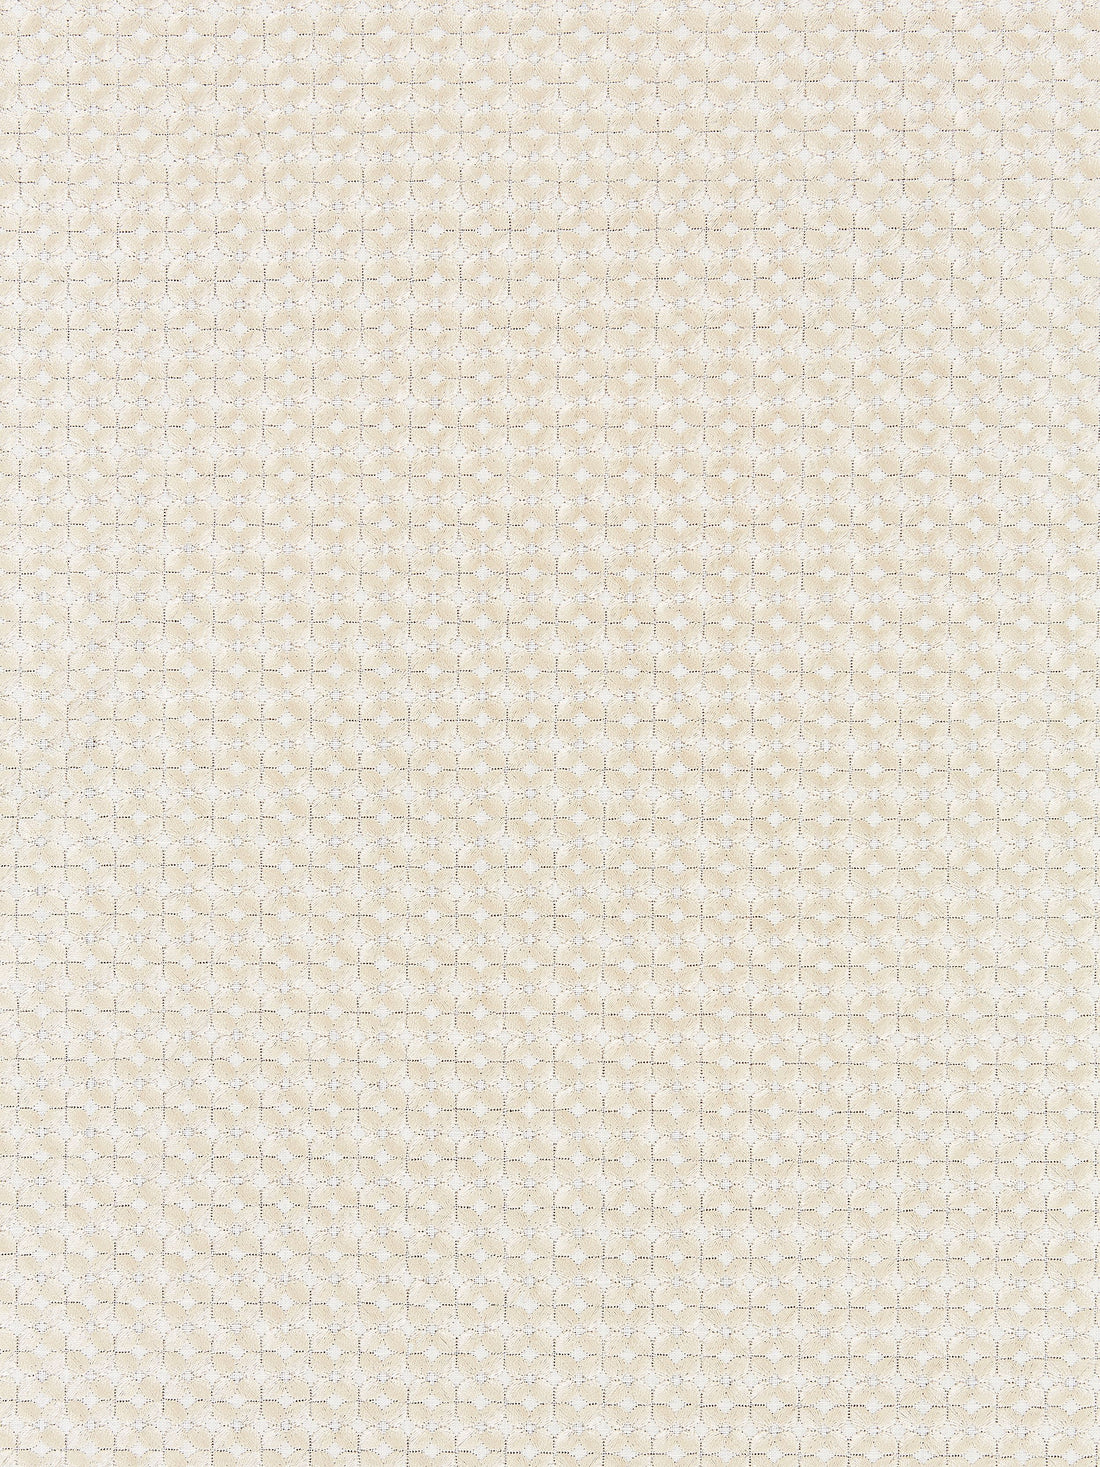 Floret Embroidery fabric in champagne color - pattern number SC 000127133 - by Scalamandre in the Scalamandre Fabrics Book 1 collection